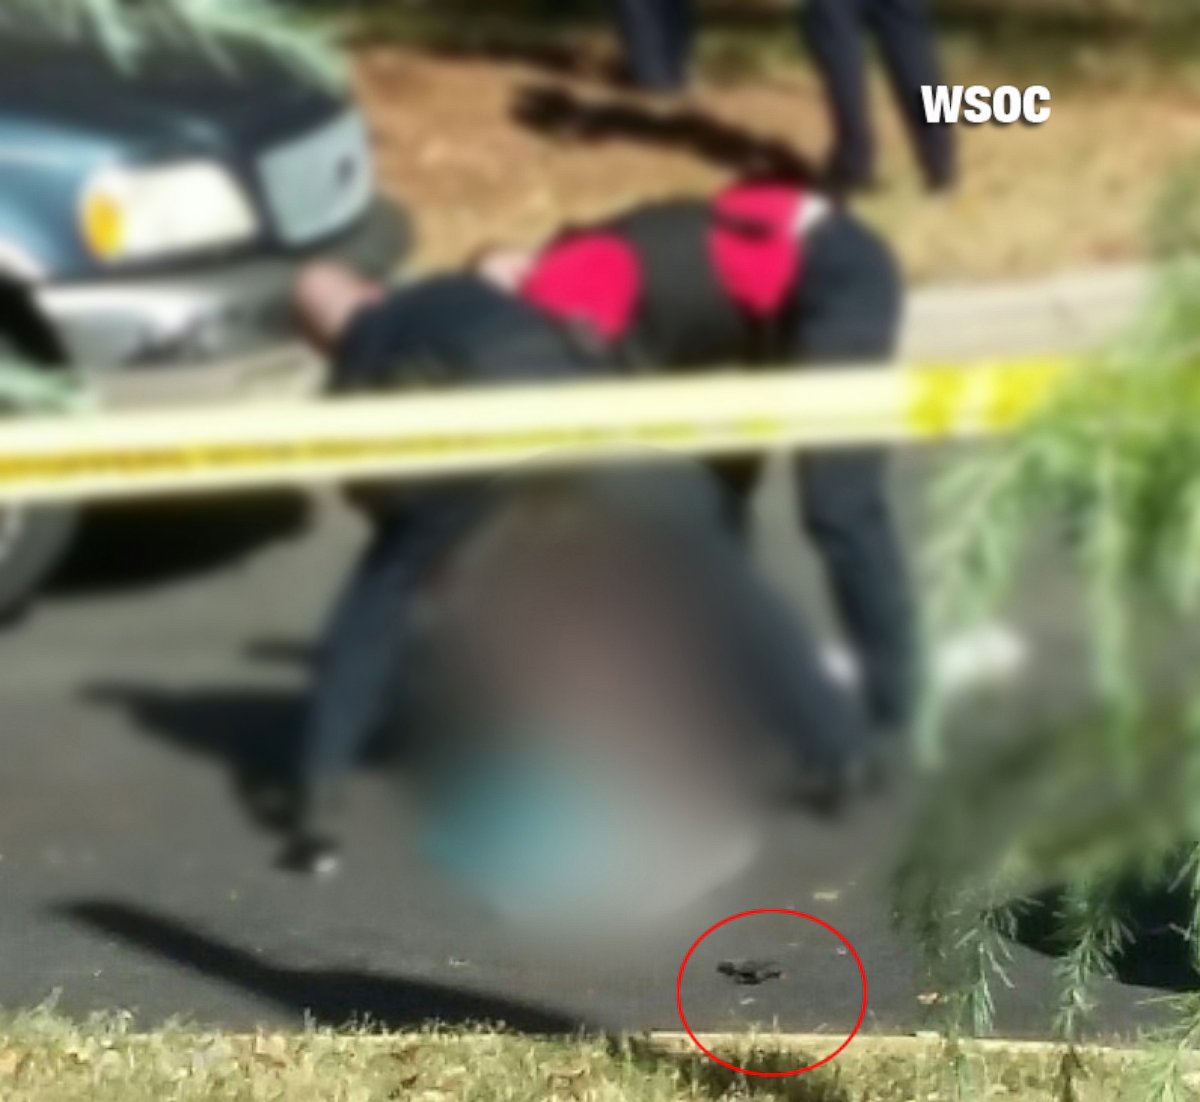 PHOTO:  This photo, obtained by ABC affiliate WSOC, appears to show the gun that police recovered from the scene of the officer-involved shooting of Keith Lamont Scott in Charlotte, North Carolina.